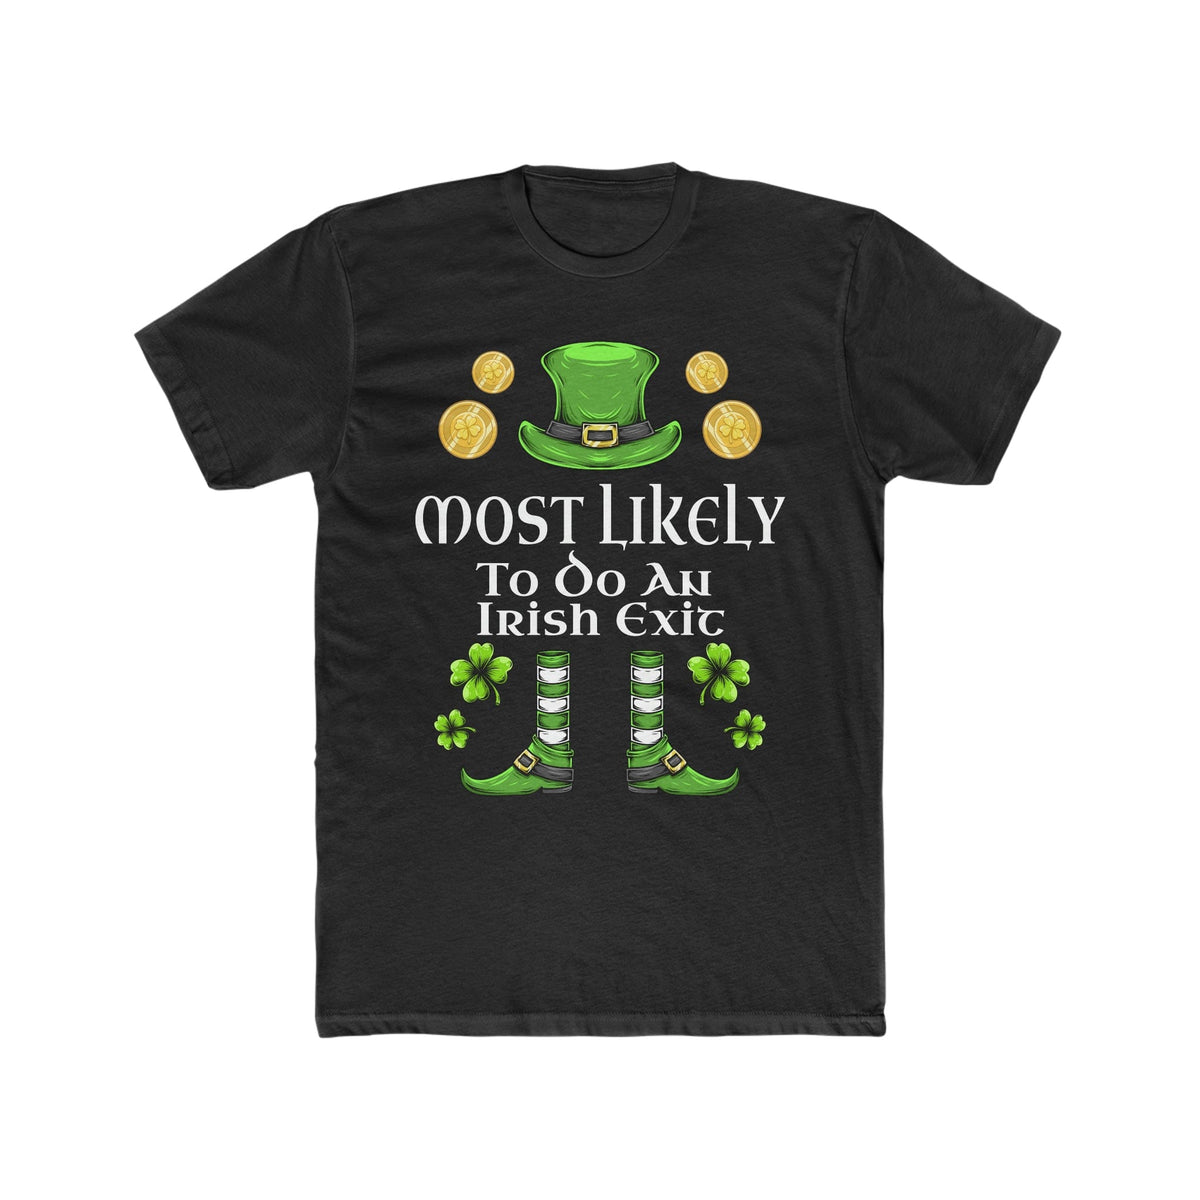 Most likely To Do An Irish Exit Premium Unisex Shirt